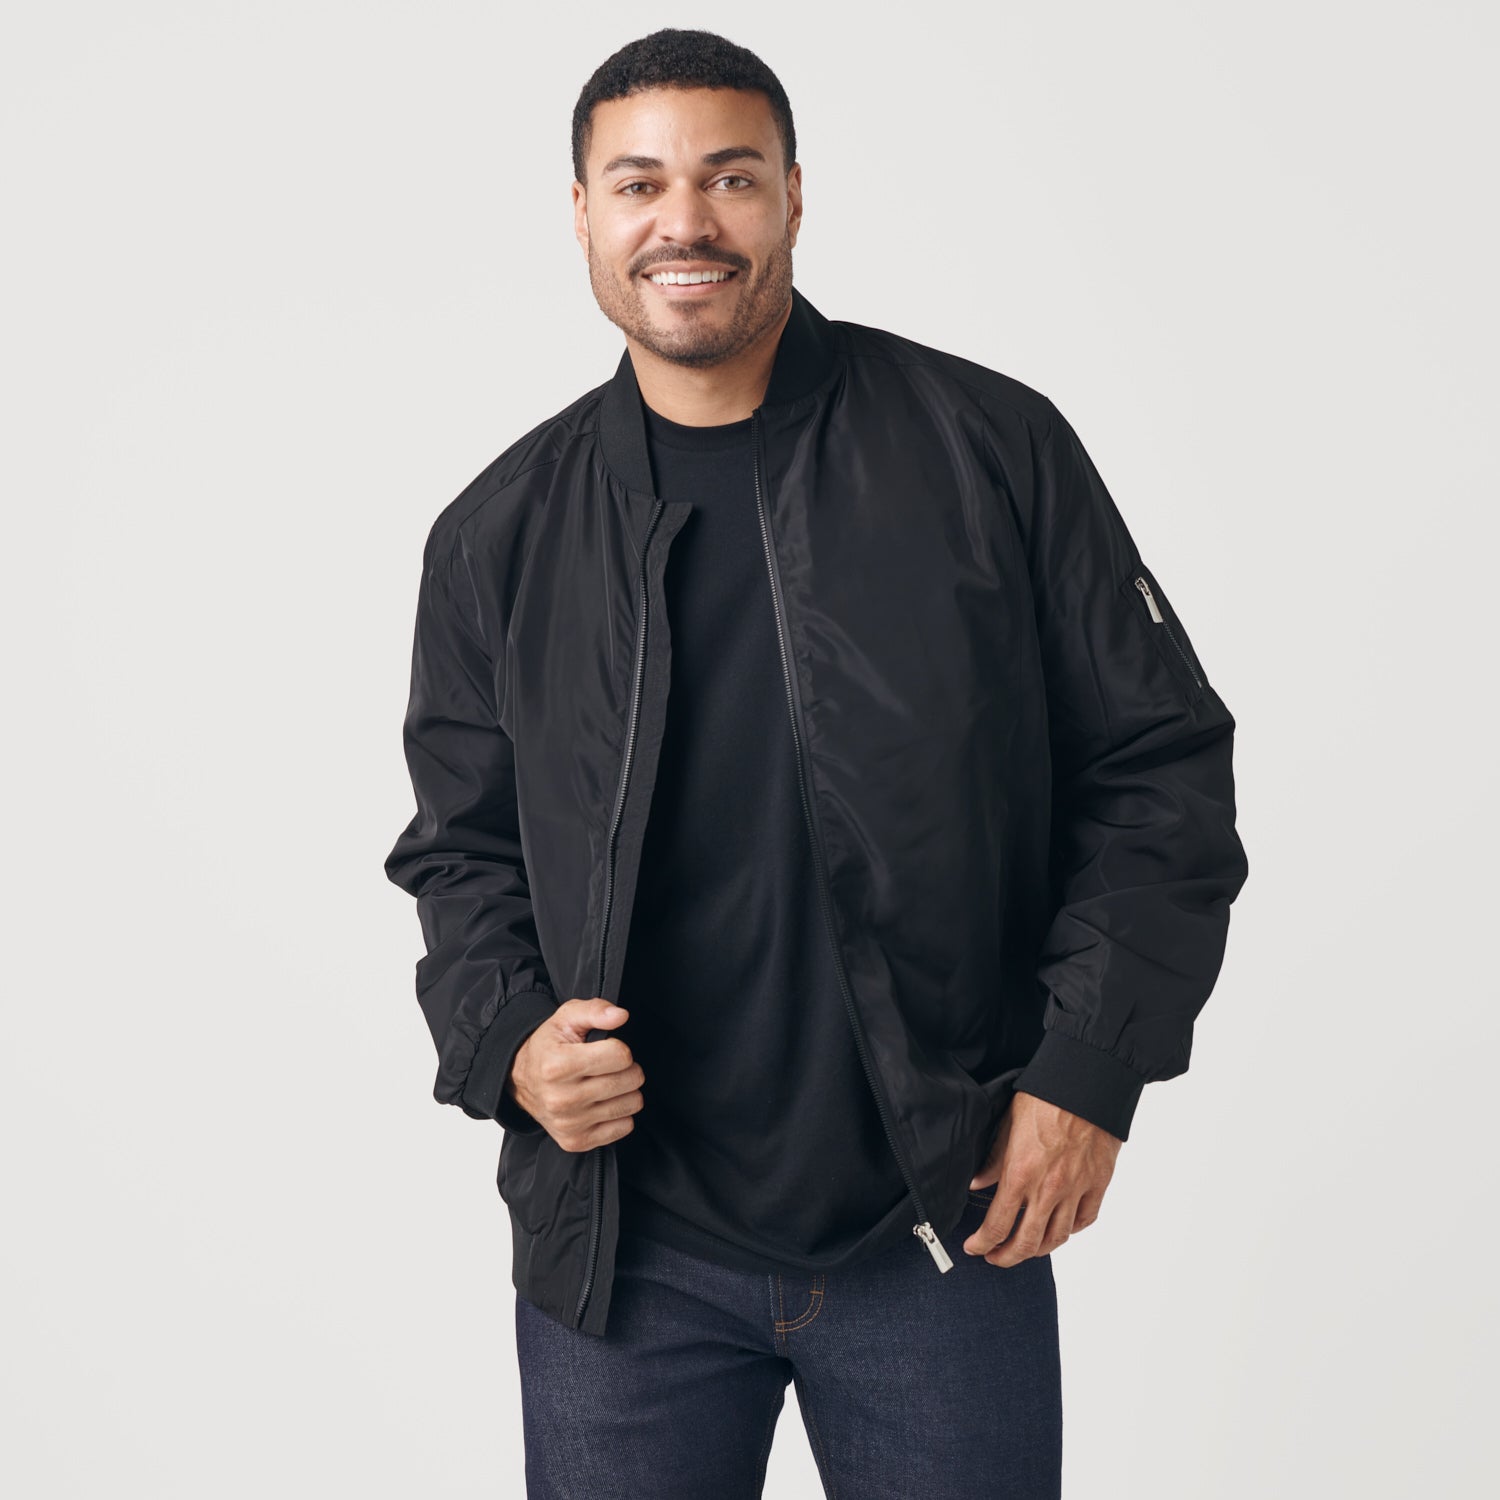 Bomber Jackets for Tall Men in Black L / Extra Tall / Black